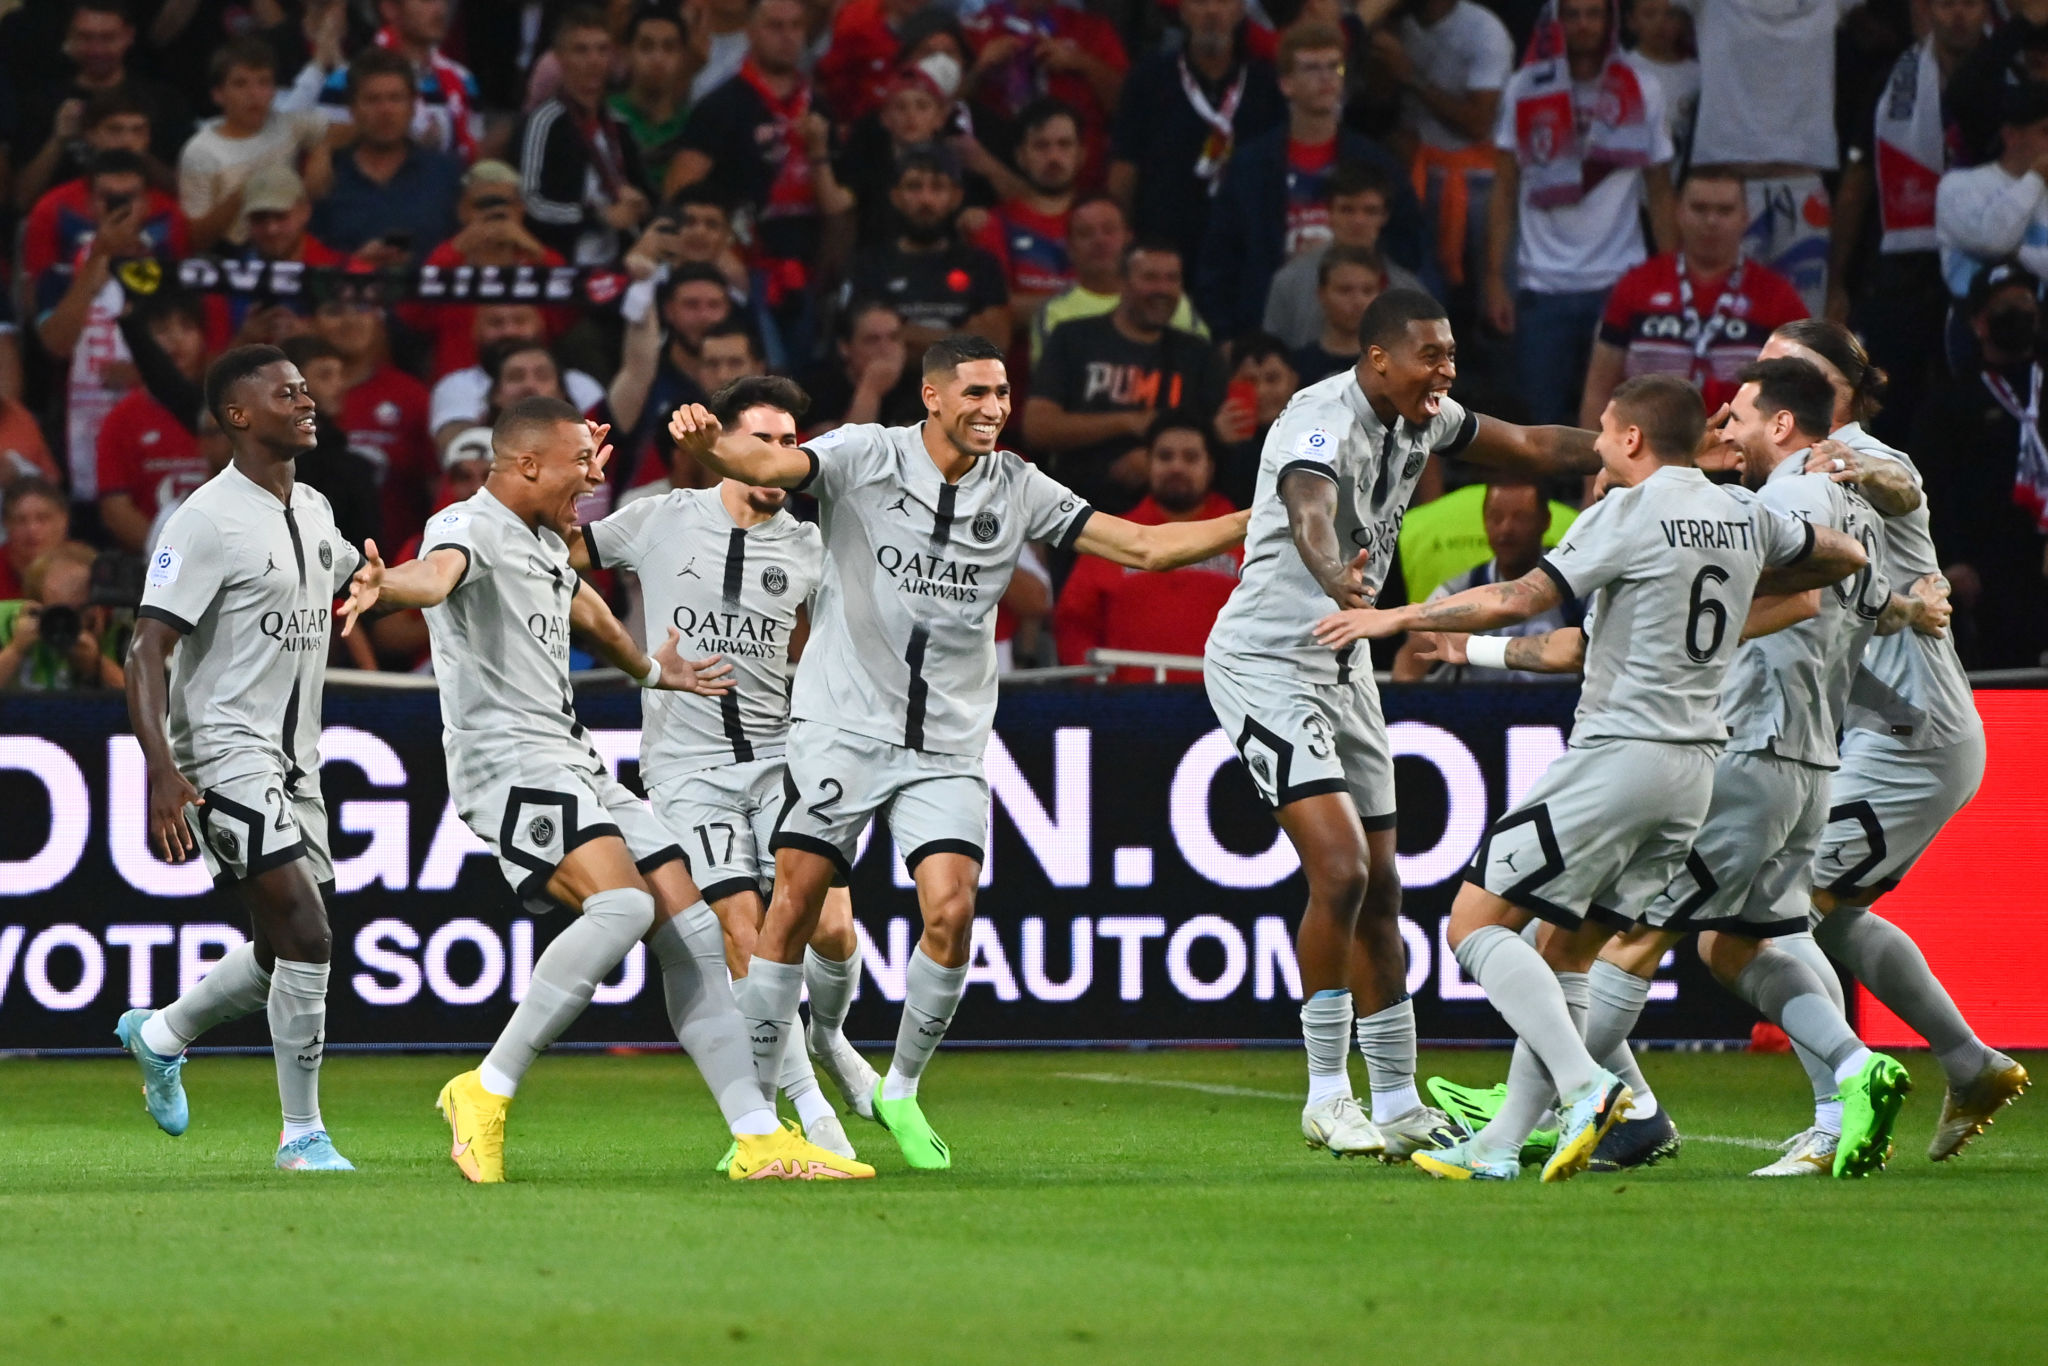 Lille vs PSG Highlights: LIL 1-7 PSG, Mbappe, Messi and Neymar on target as Paris-Saint Germain thrash LOSC Lille 7-1, Watch PSG beat Lille HIGHLIGHTS